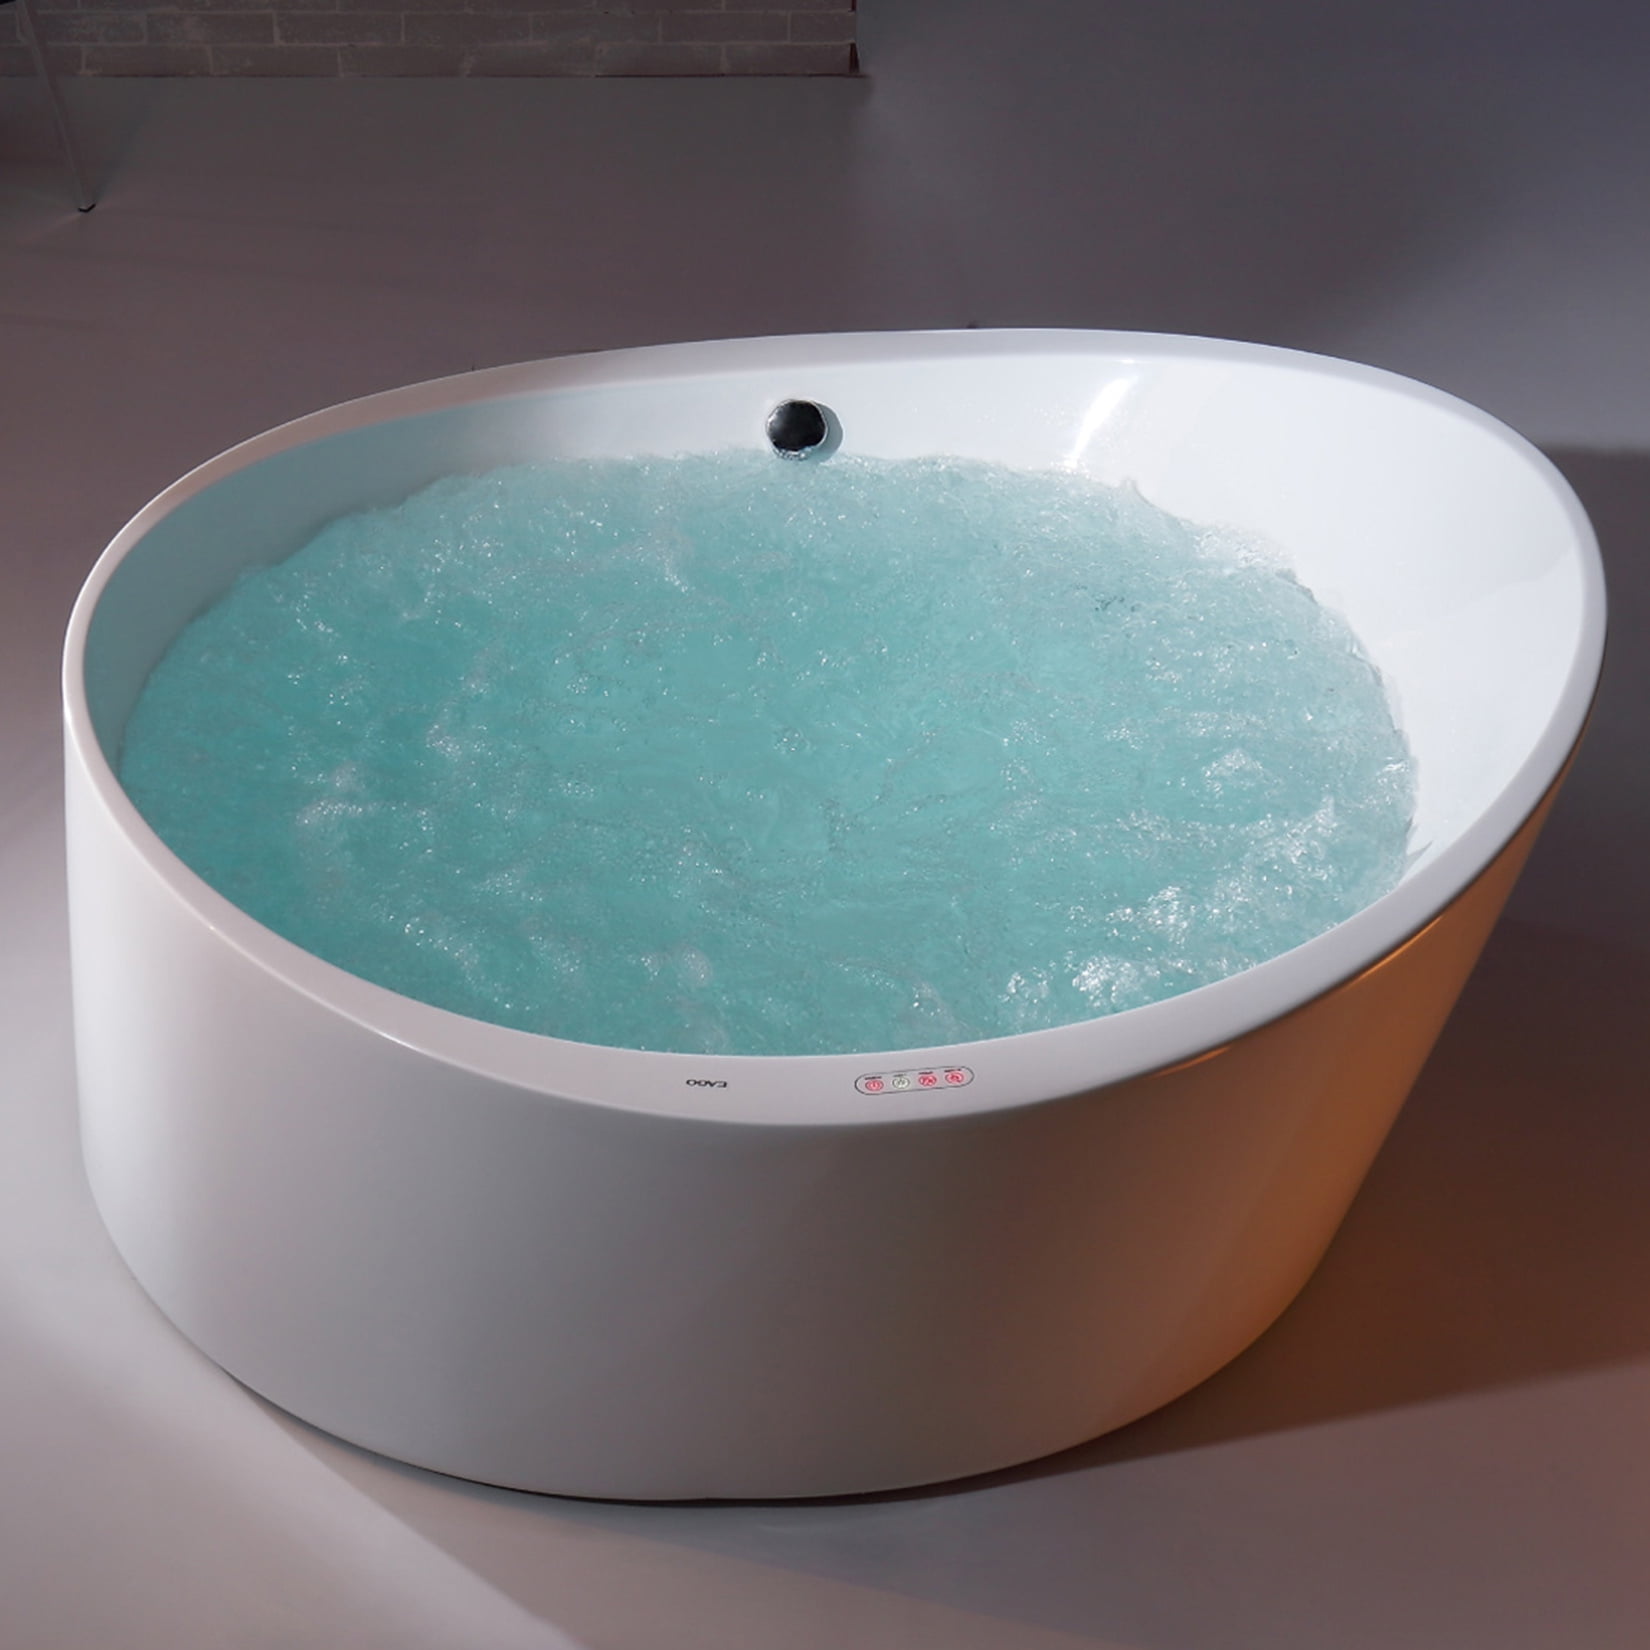 Am2130 6 Ft. Round Free Standing Acrylic Air Bubble Bathtub